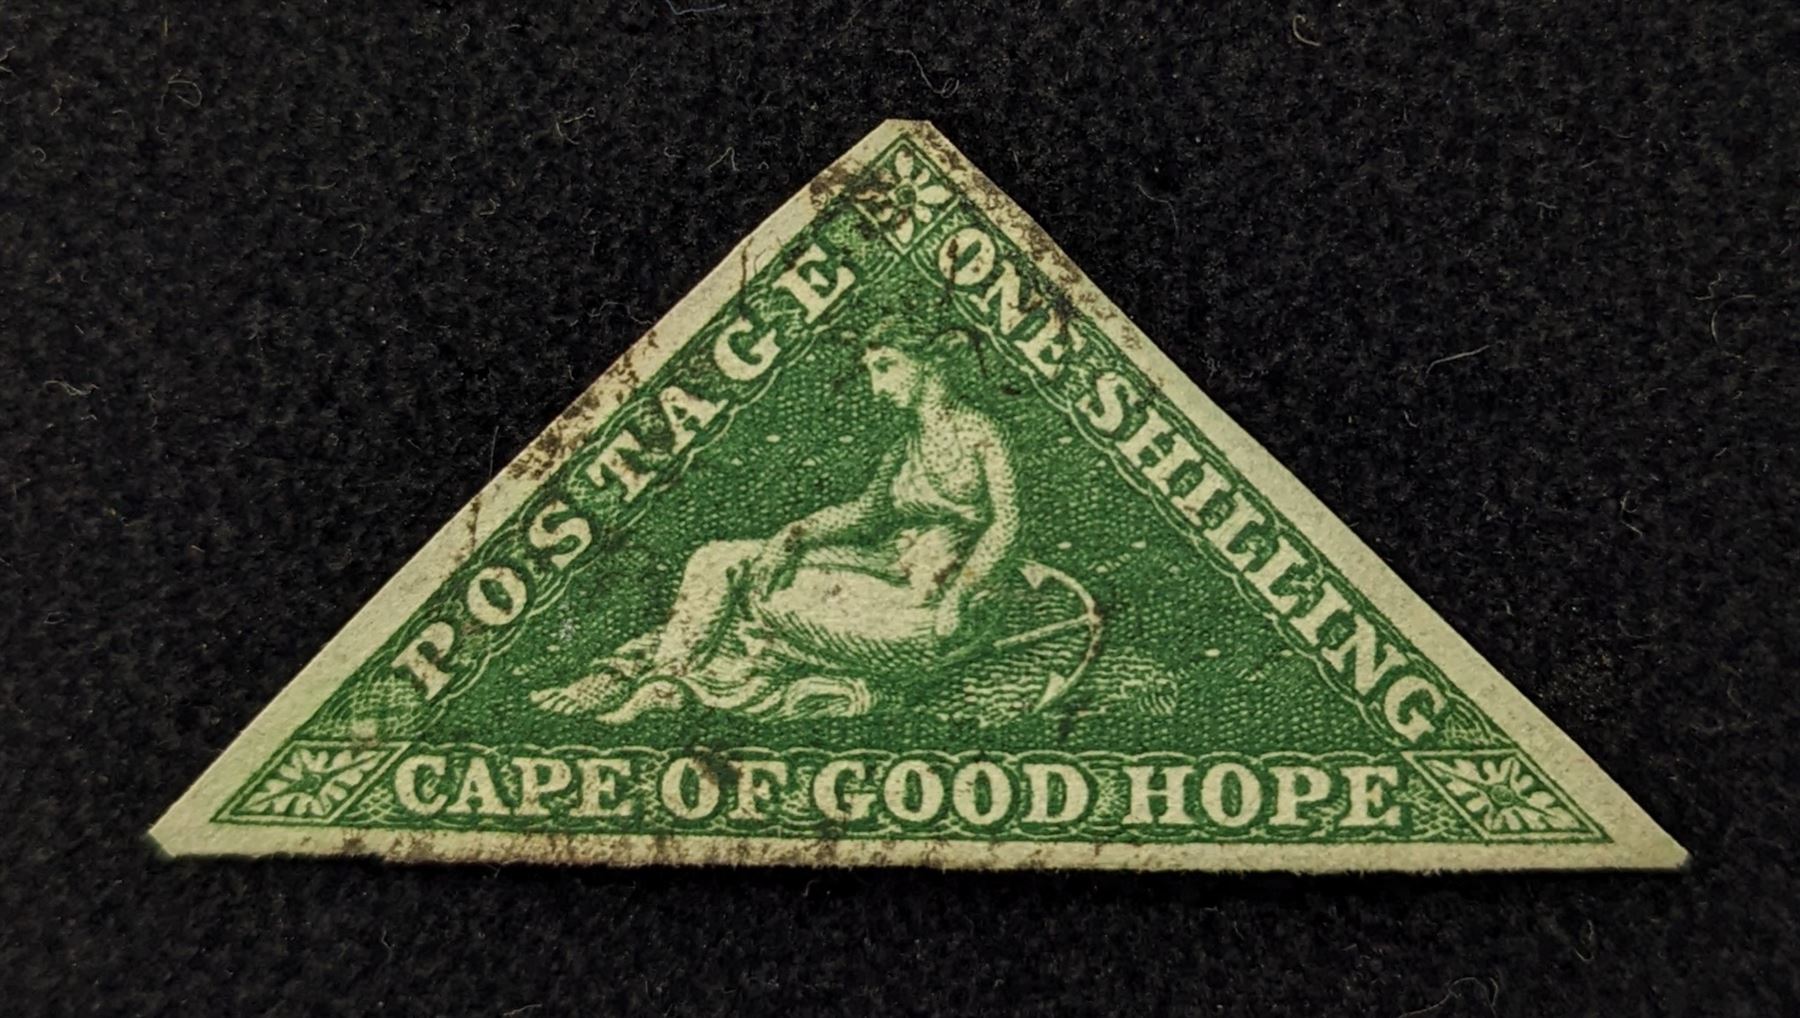 Cape of Good Hope triangle stamps - Image 3 of 6